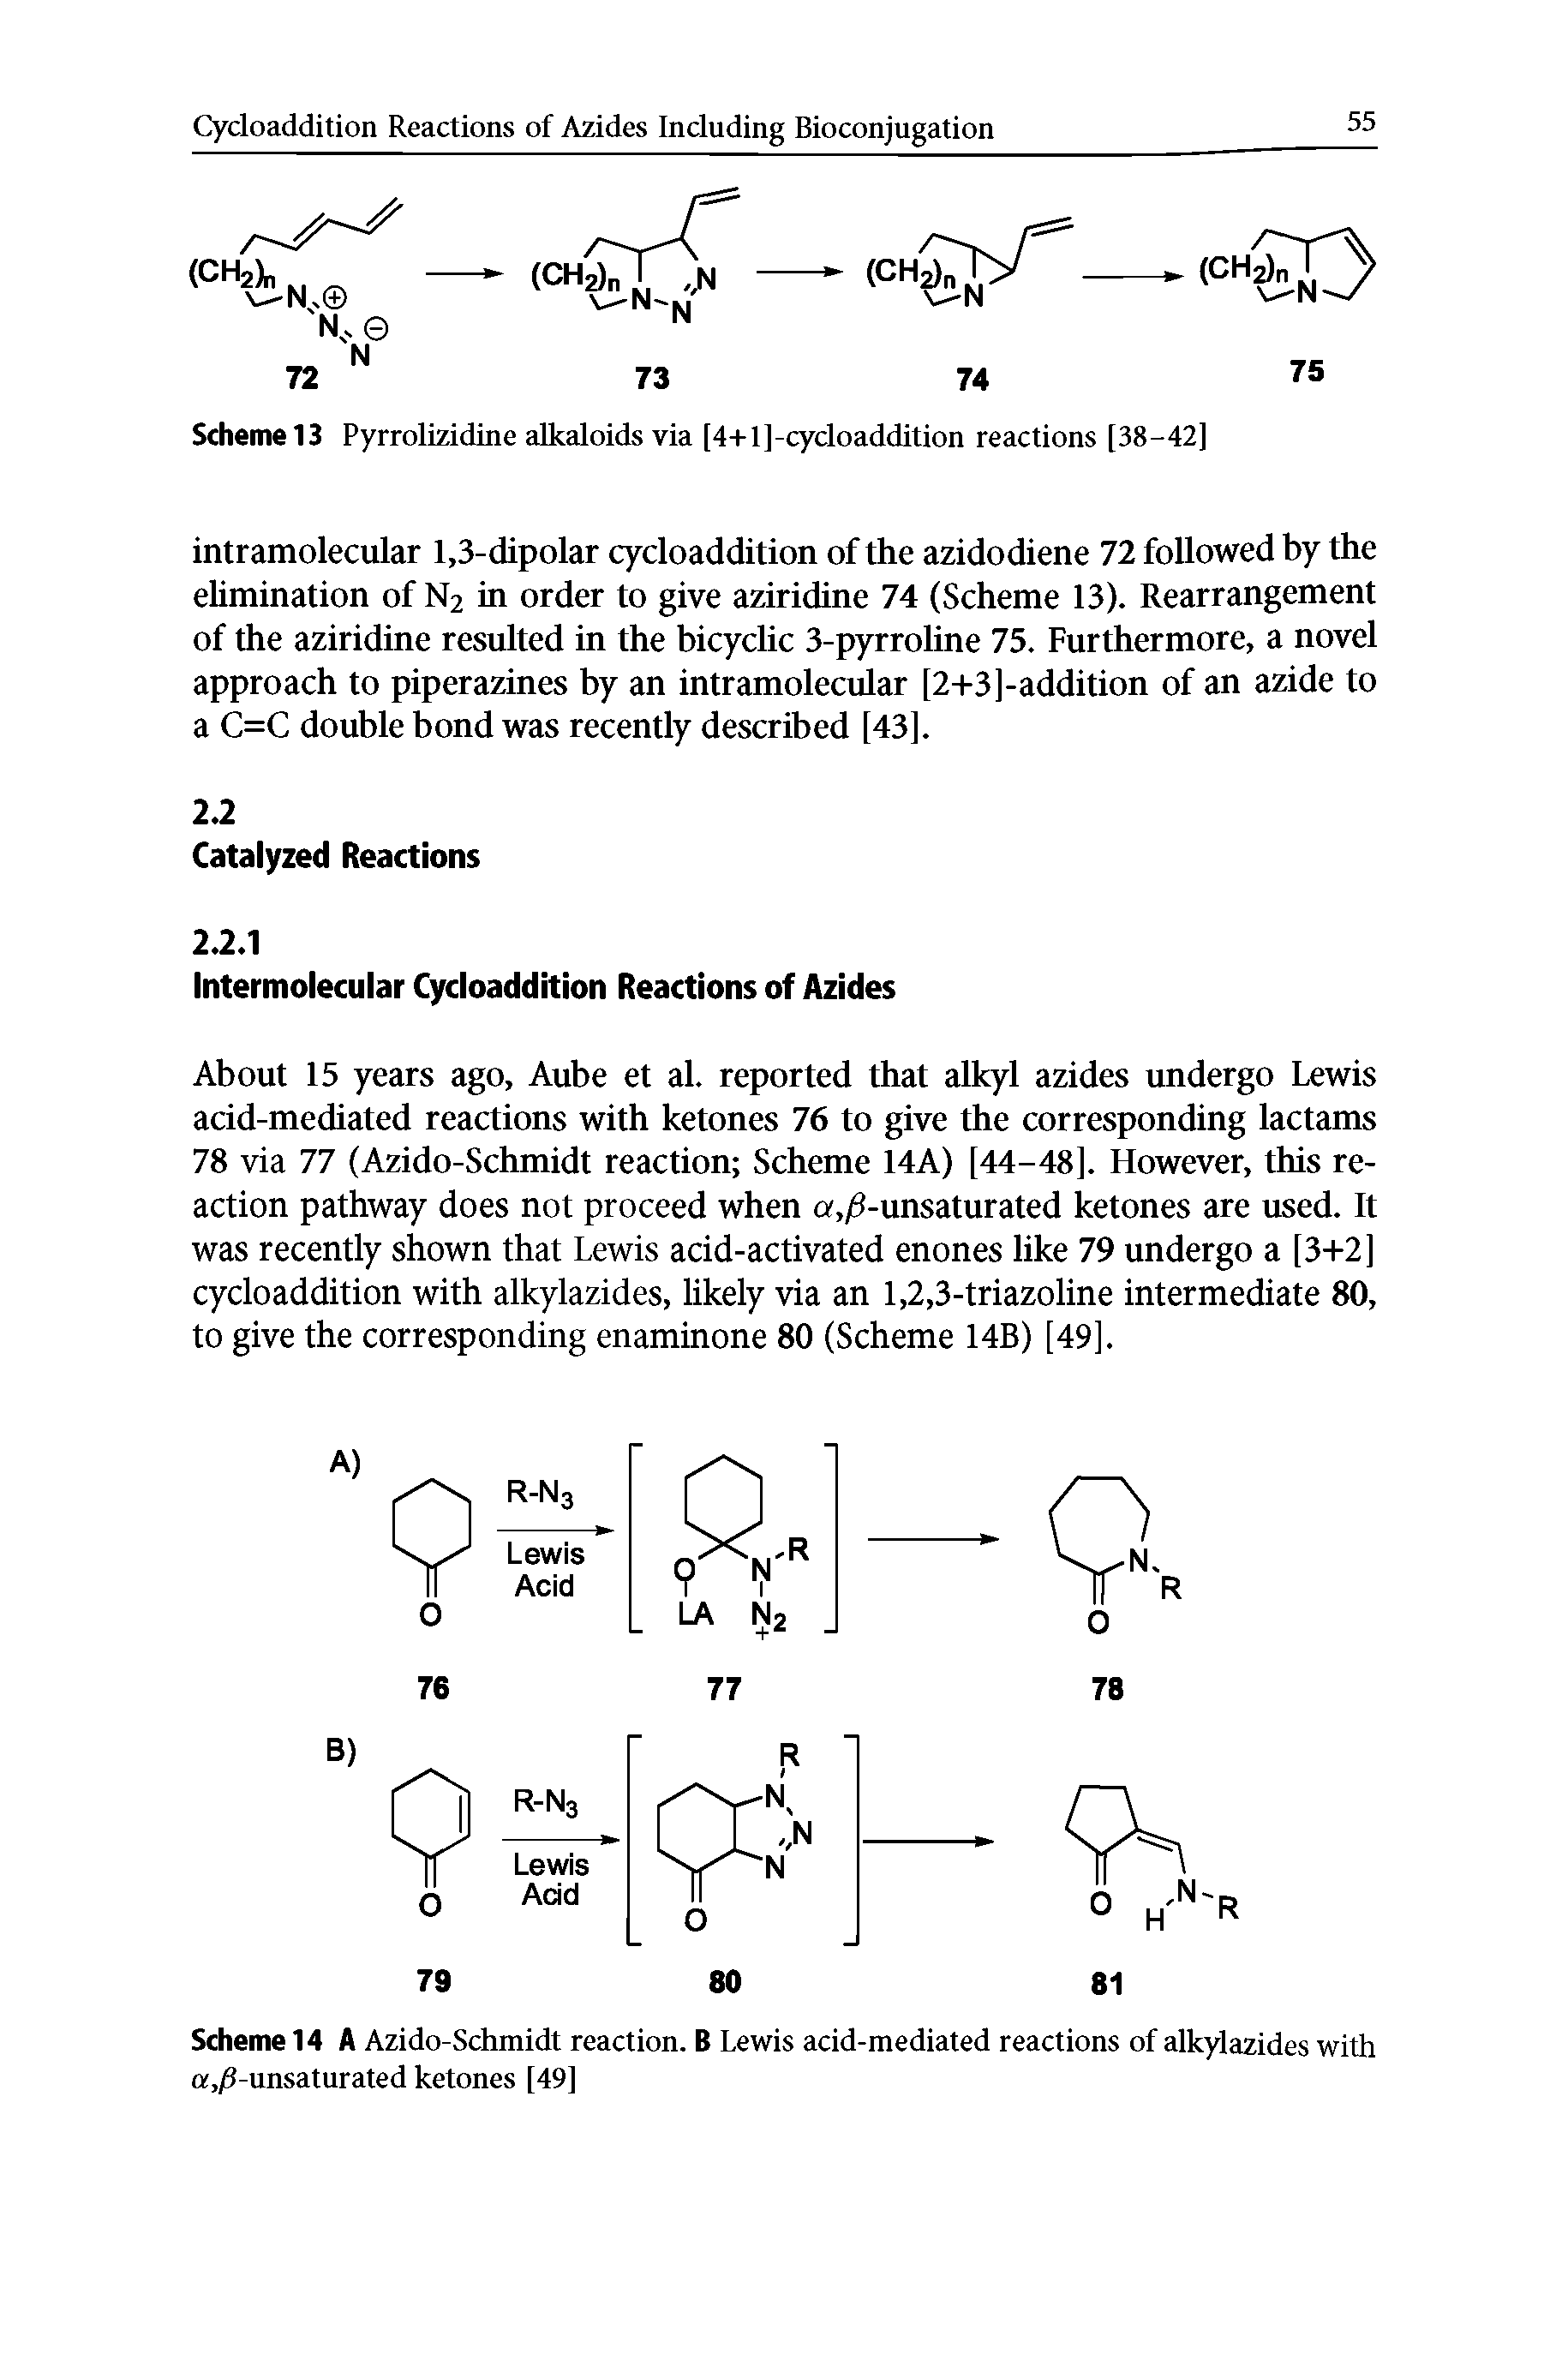 Scheme 14 A Azido-Schmidt reaction. B Lewis acid-mediated reactions of alk)4azides with a, 8-unsaturated ketones [49]...